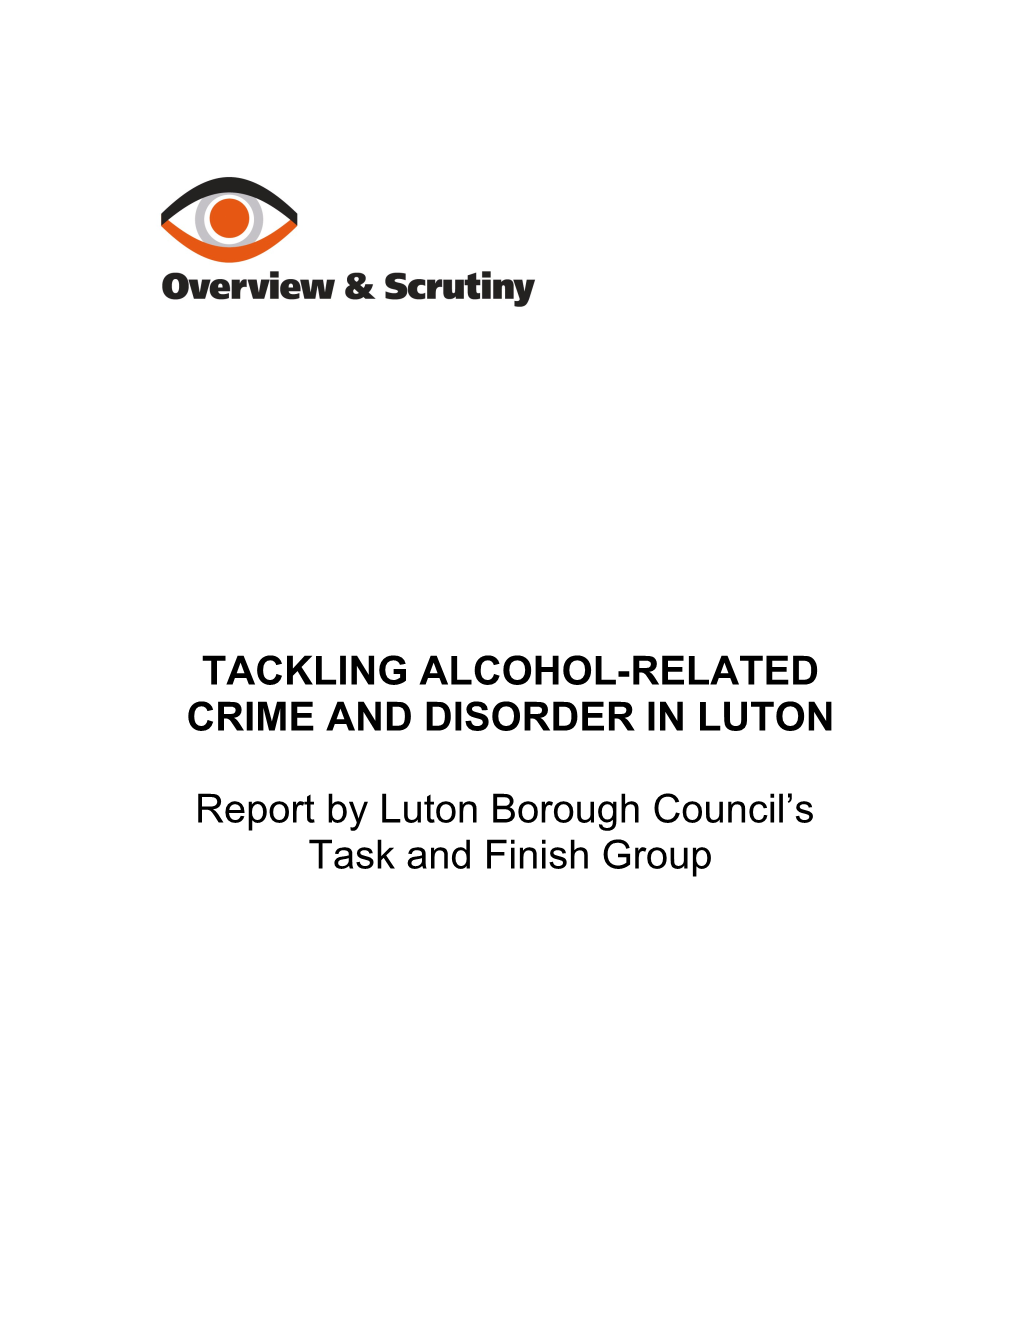 Tackling Alcohol Related Crime and Disorder in Luton Report